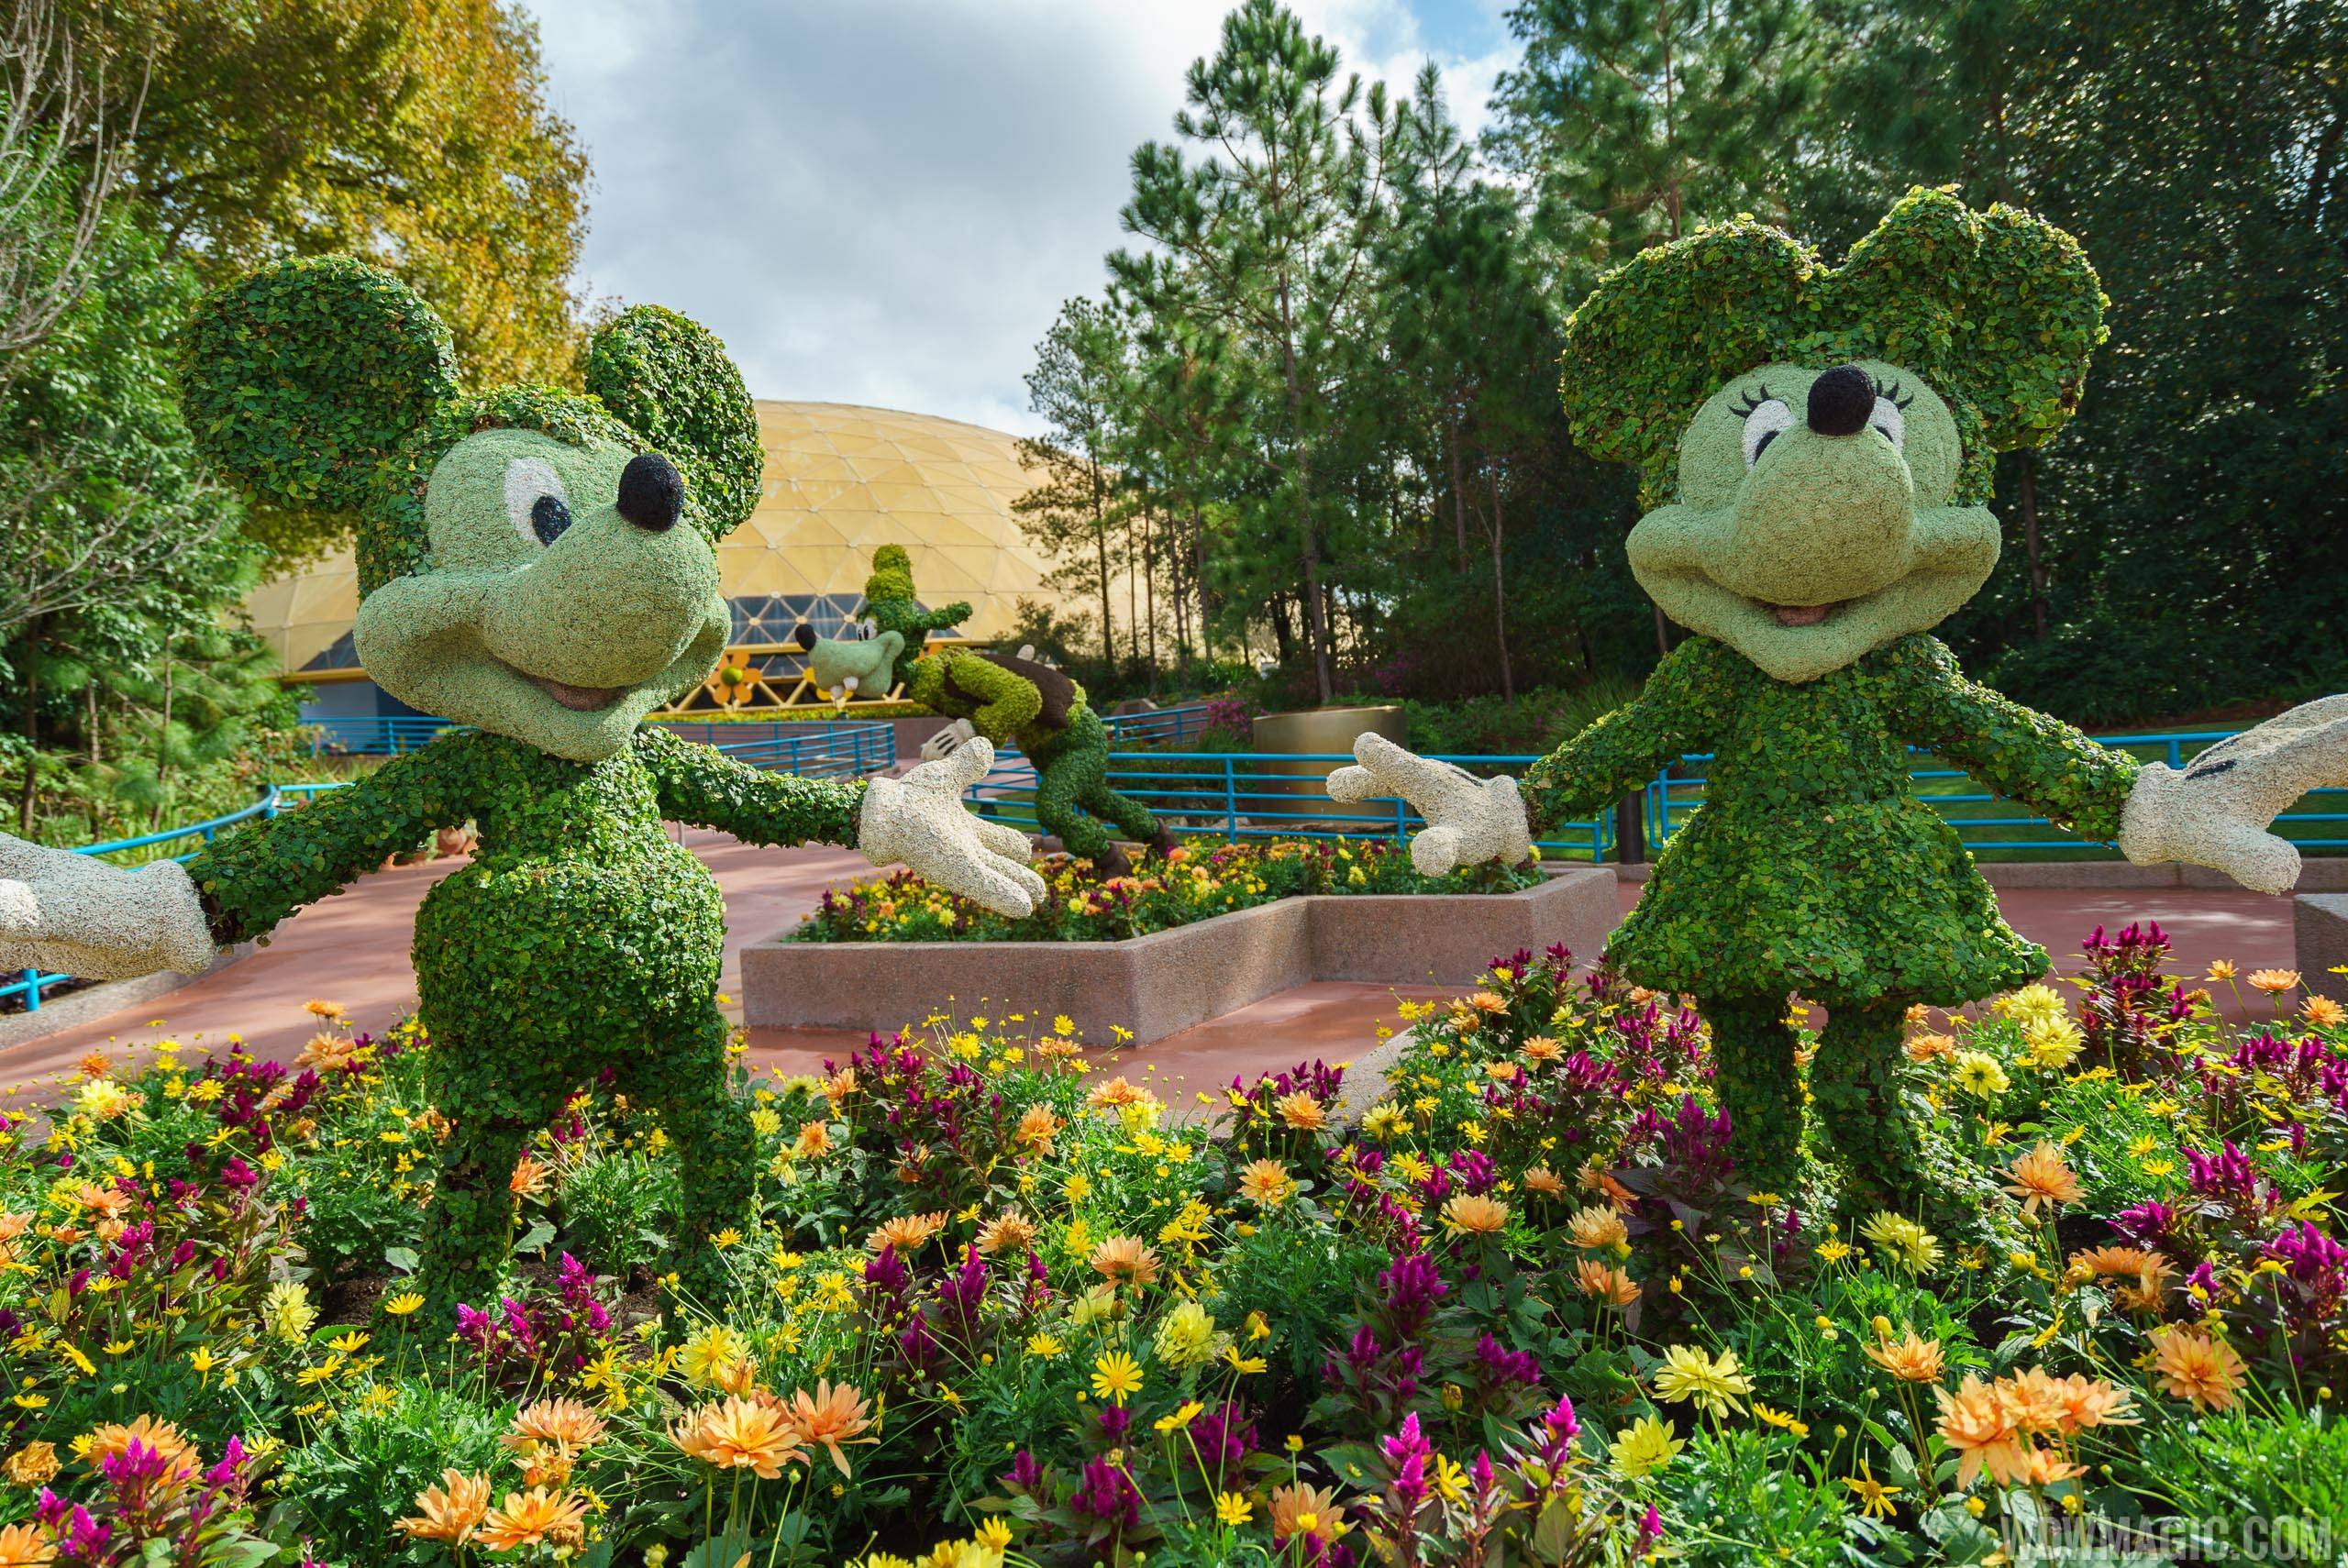 2017 Flower and Garden Festival - Mickey and Minnie topiary